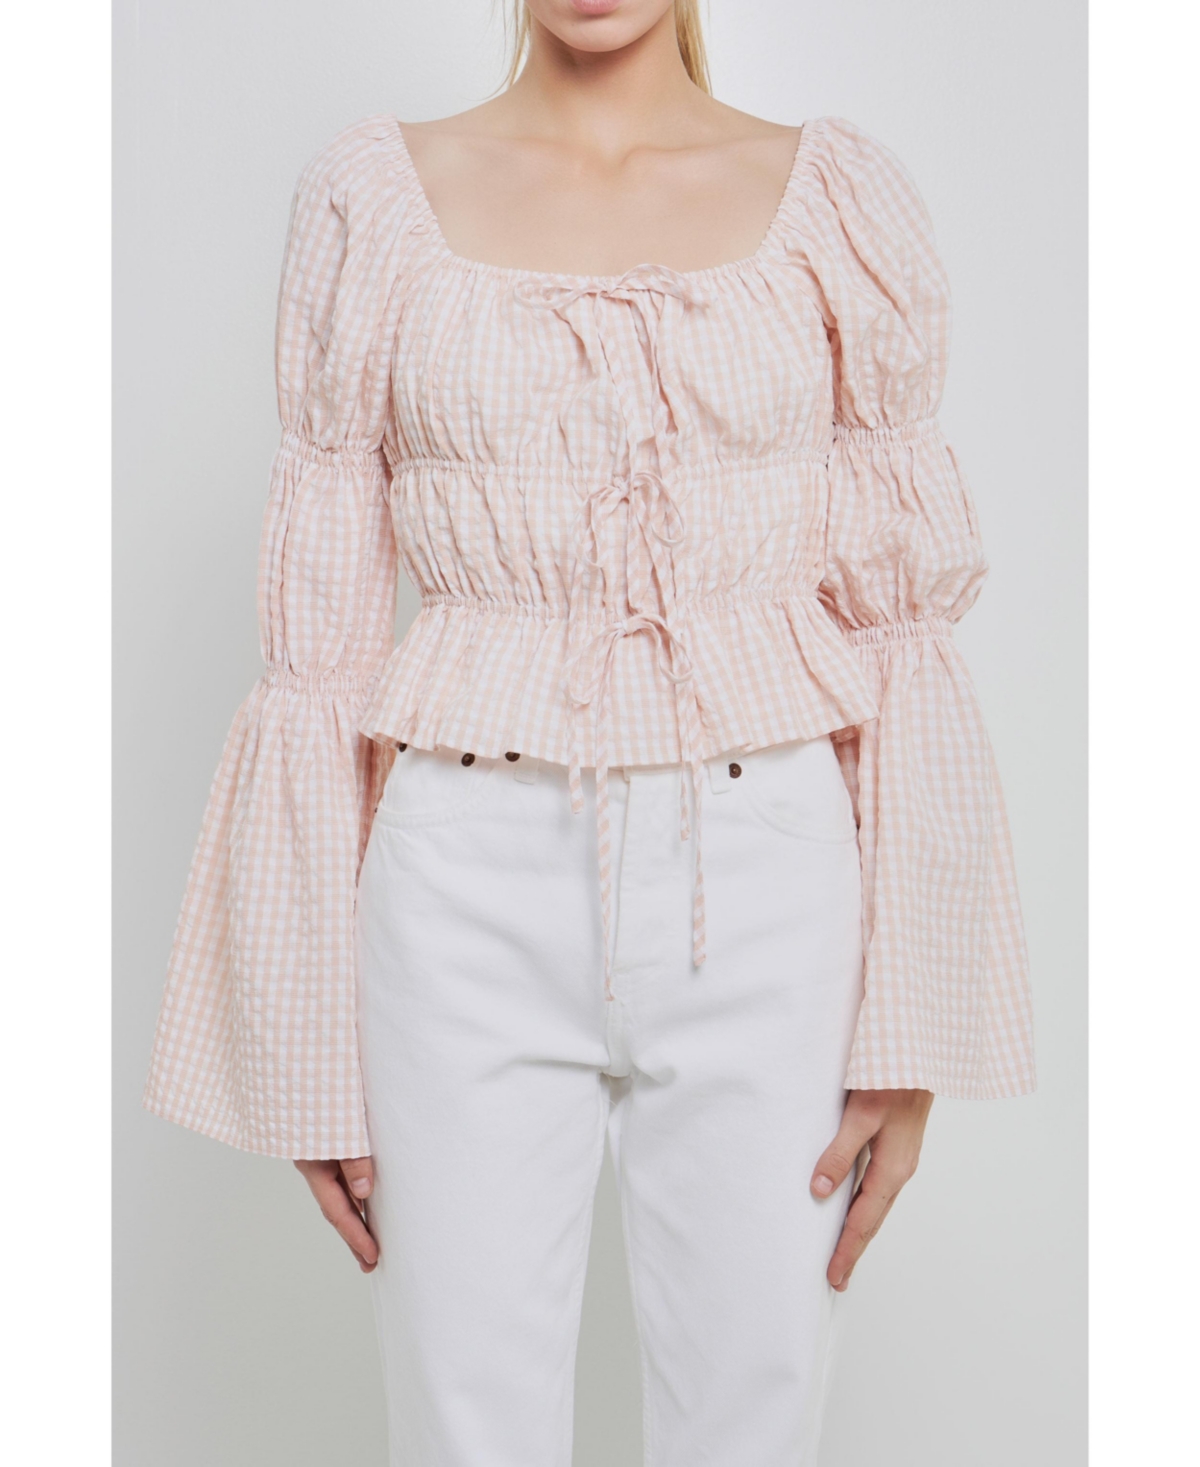 Women's Tie Detailed Shirring Top with Long Sleeves - Blush